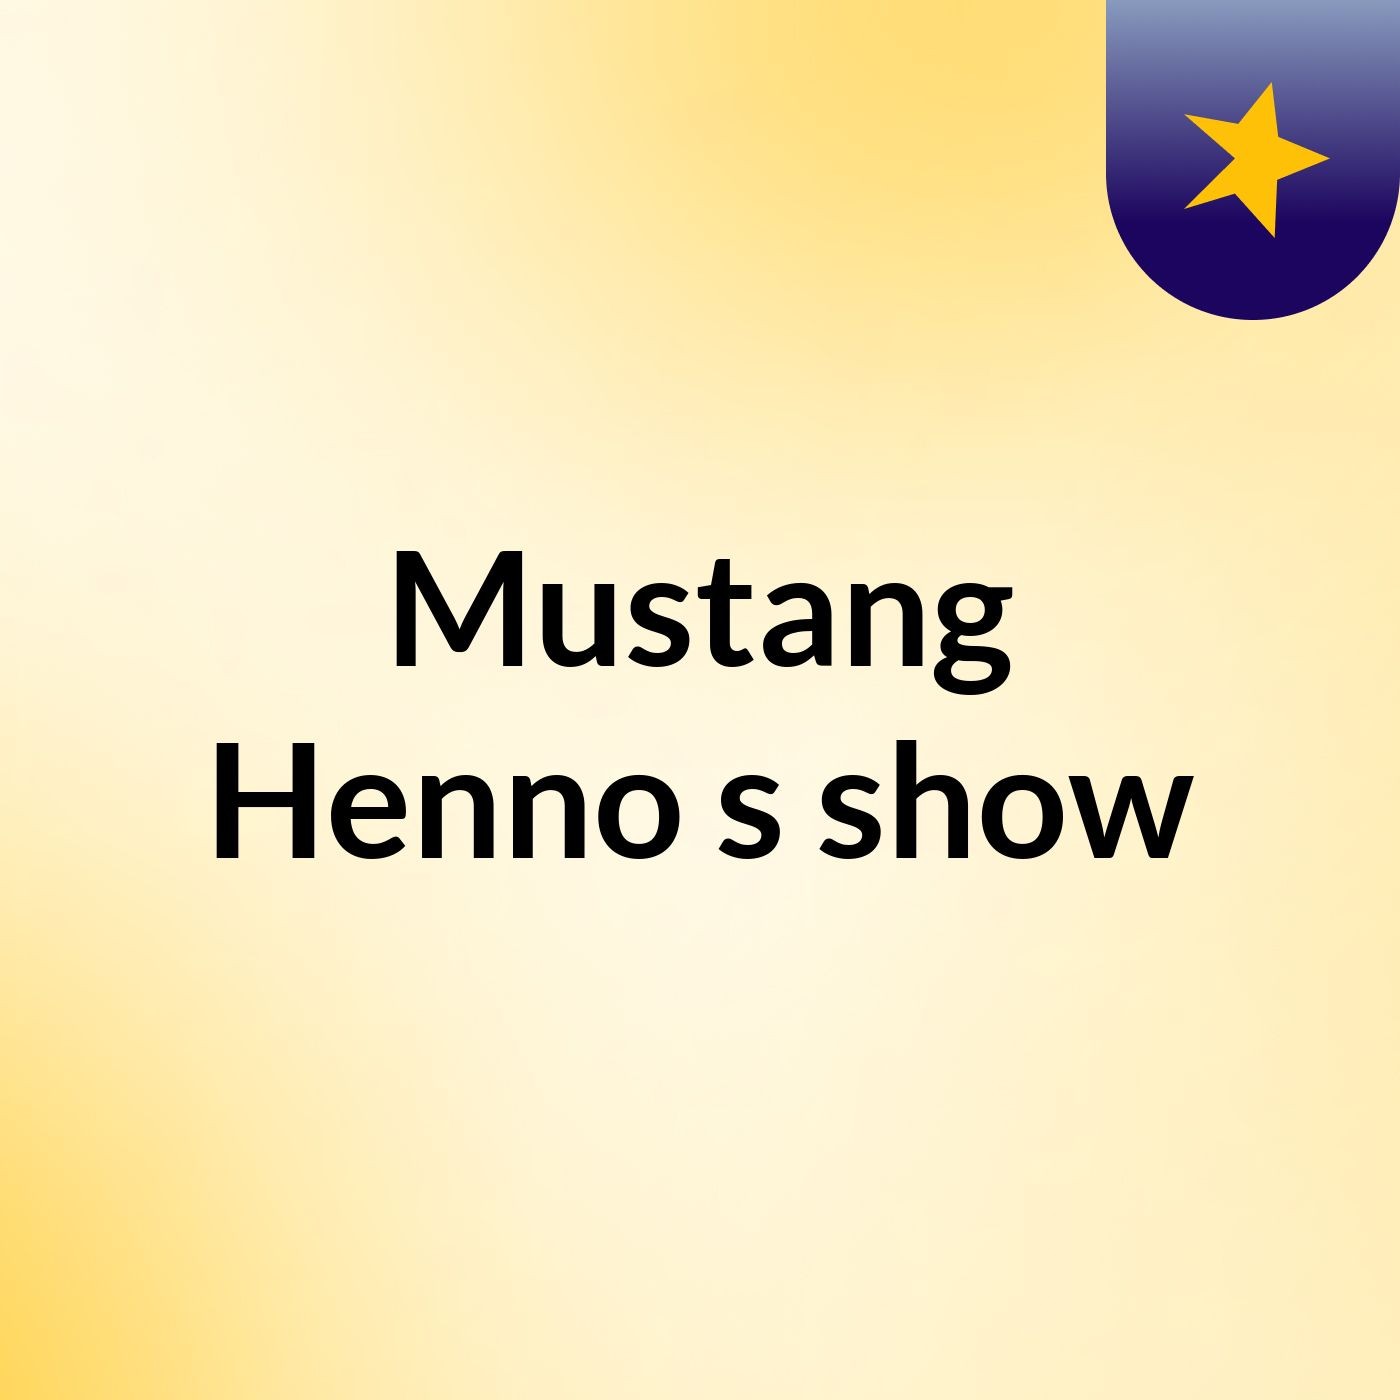 Mustang Henno's show